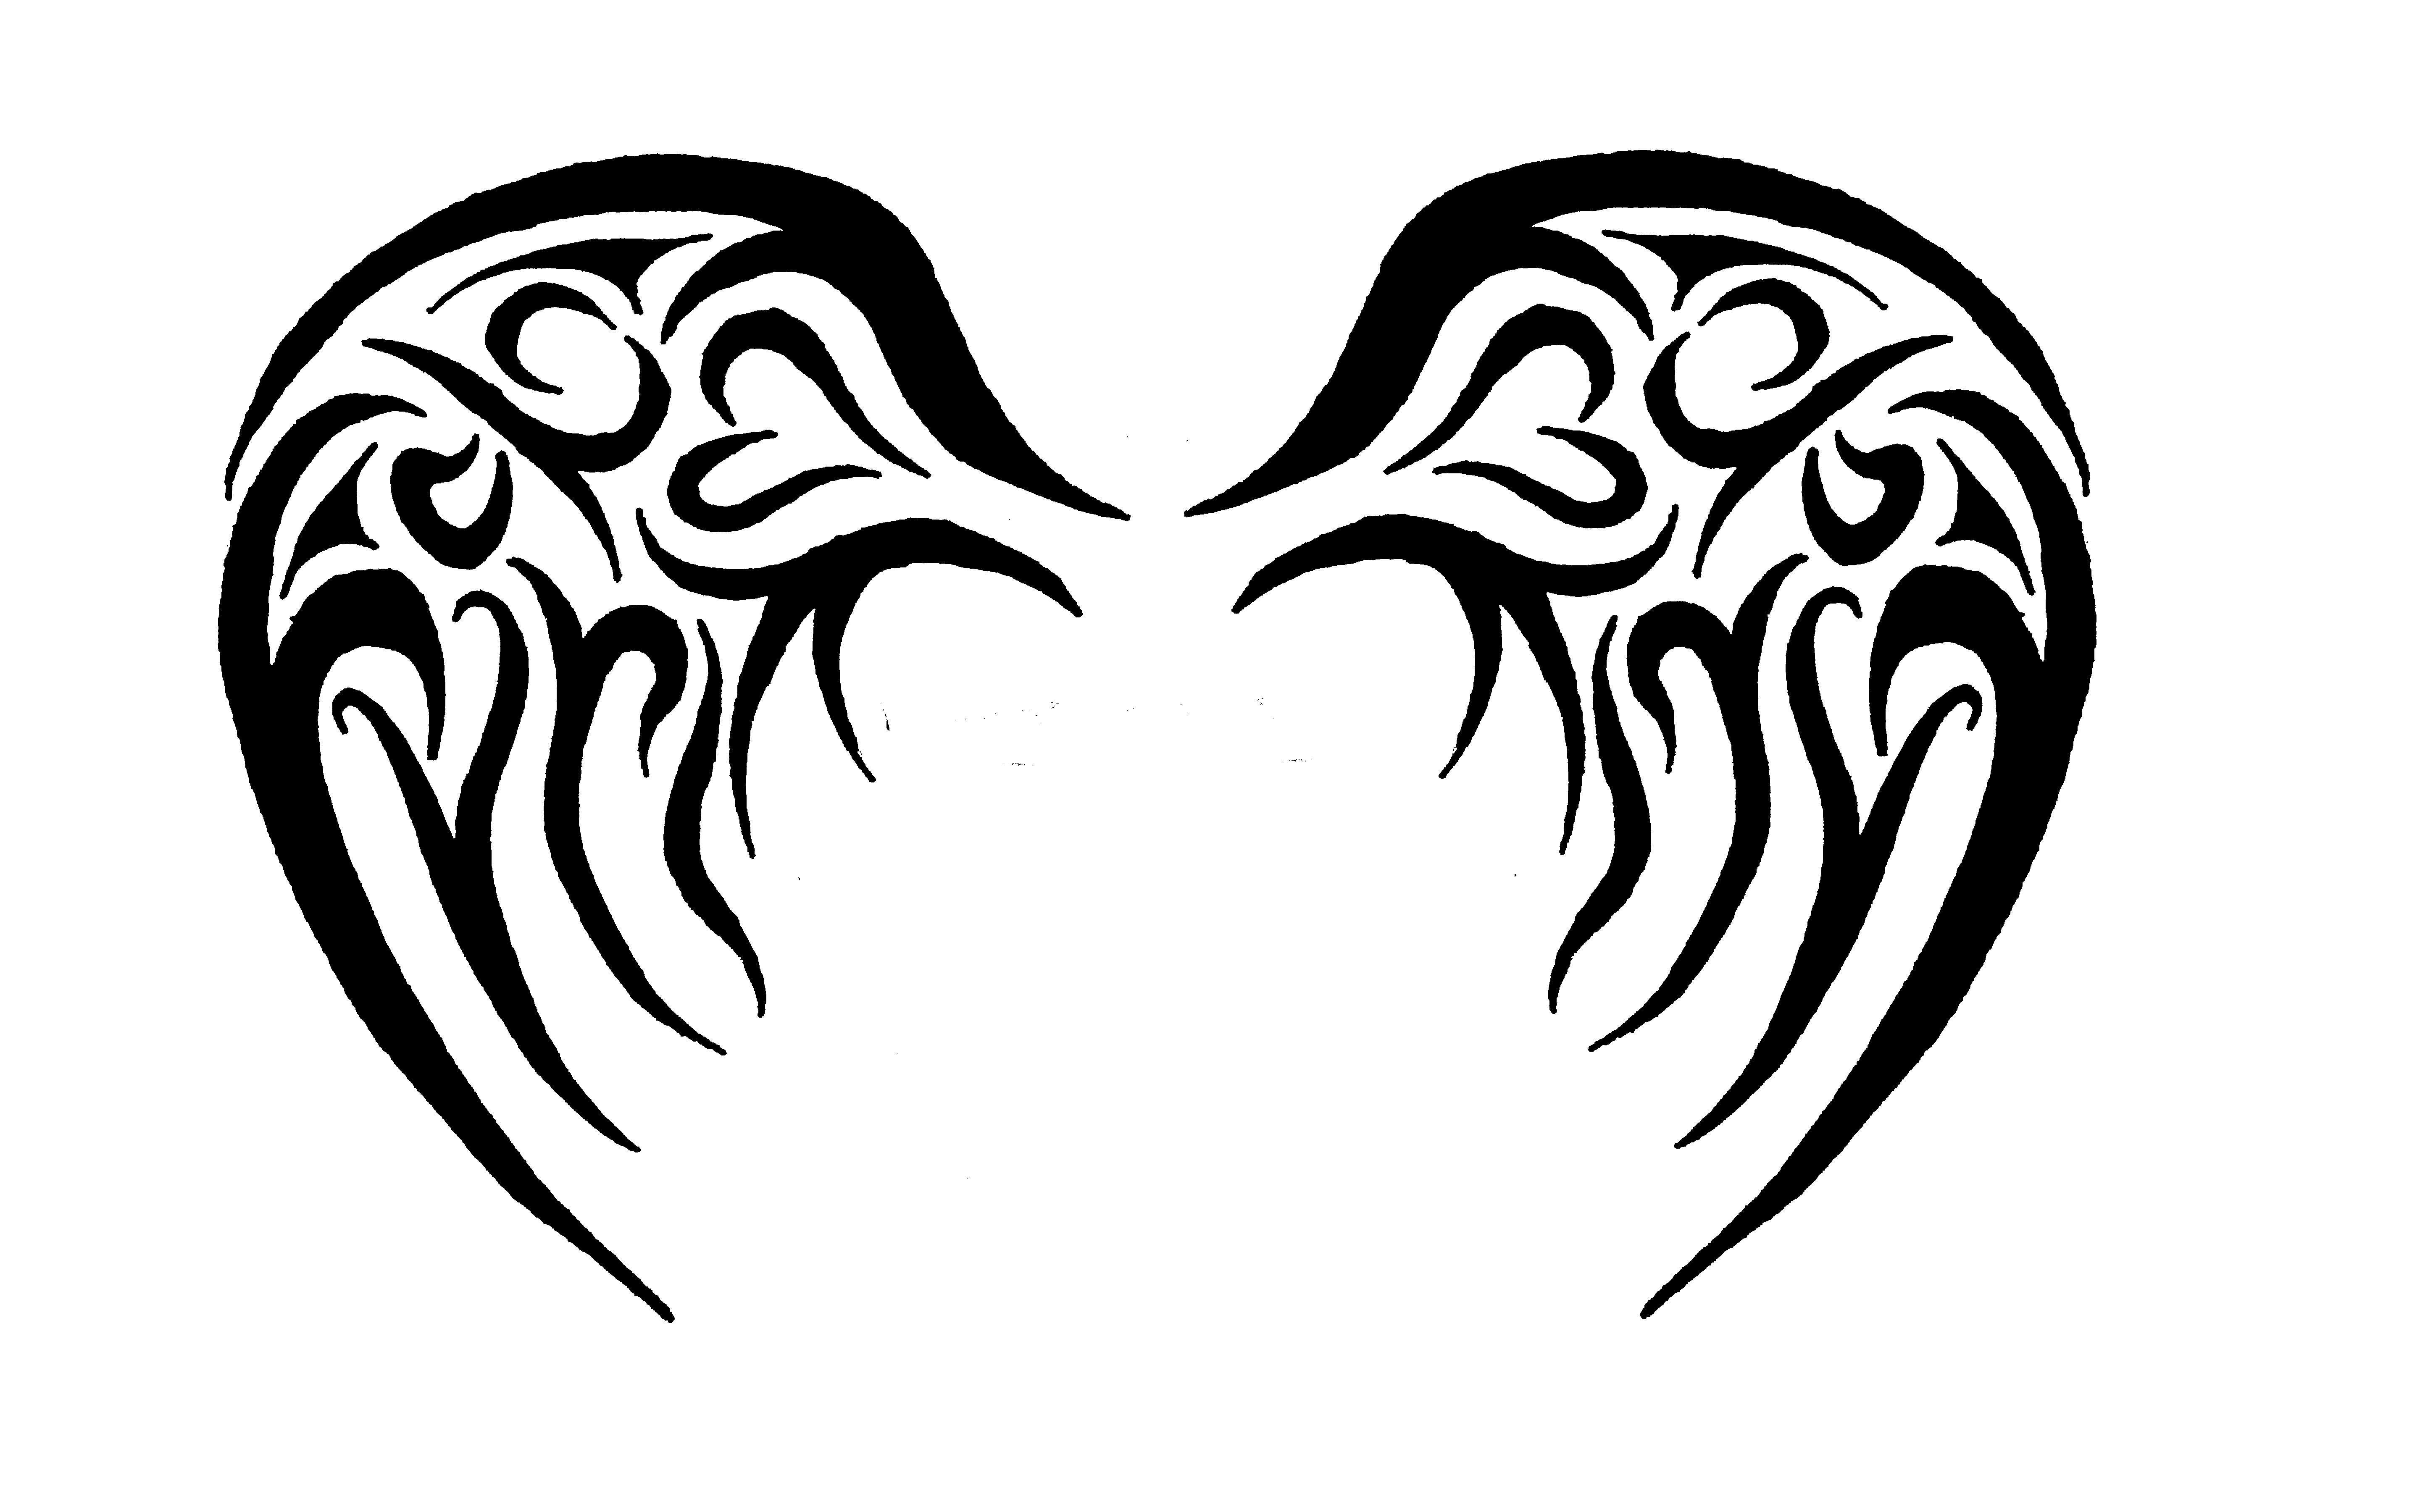 Heart With Angel Wings Drawings - ClipArt Best